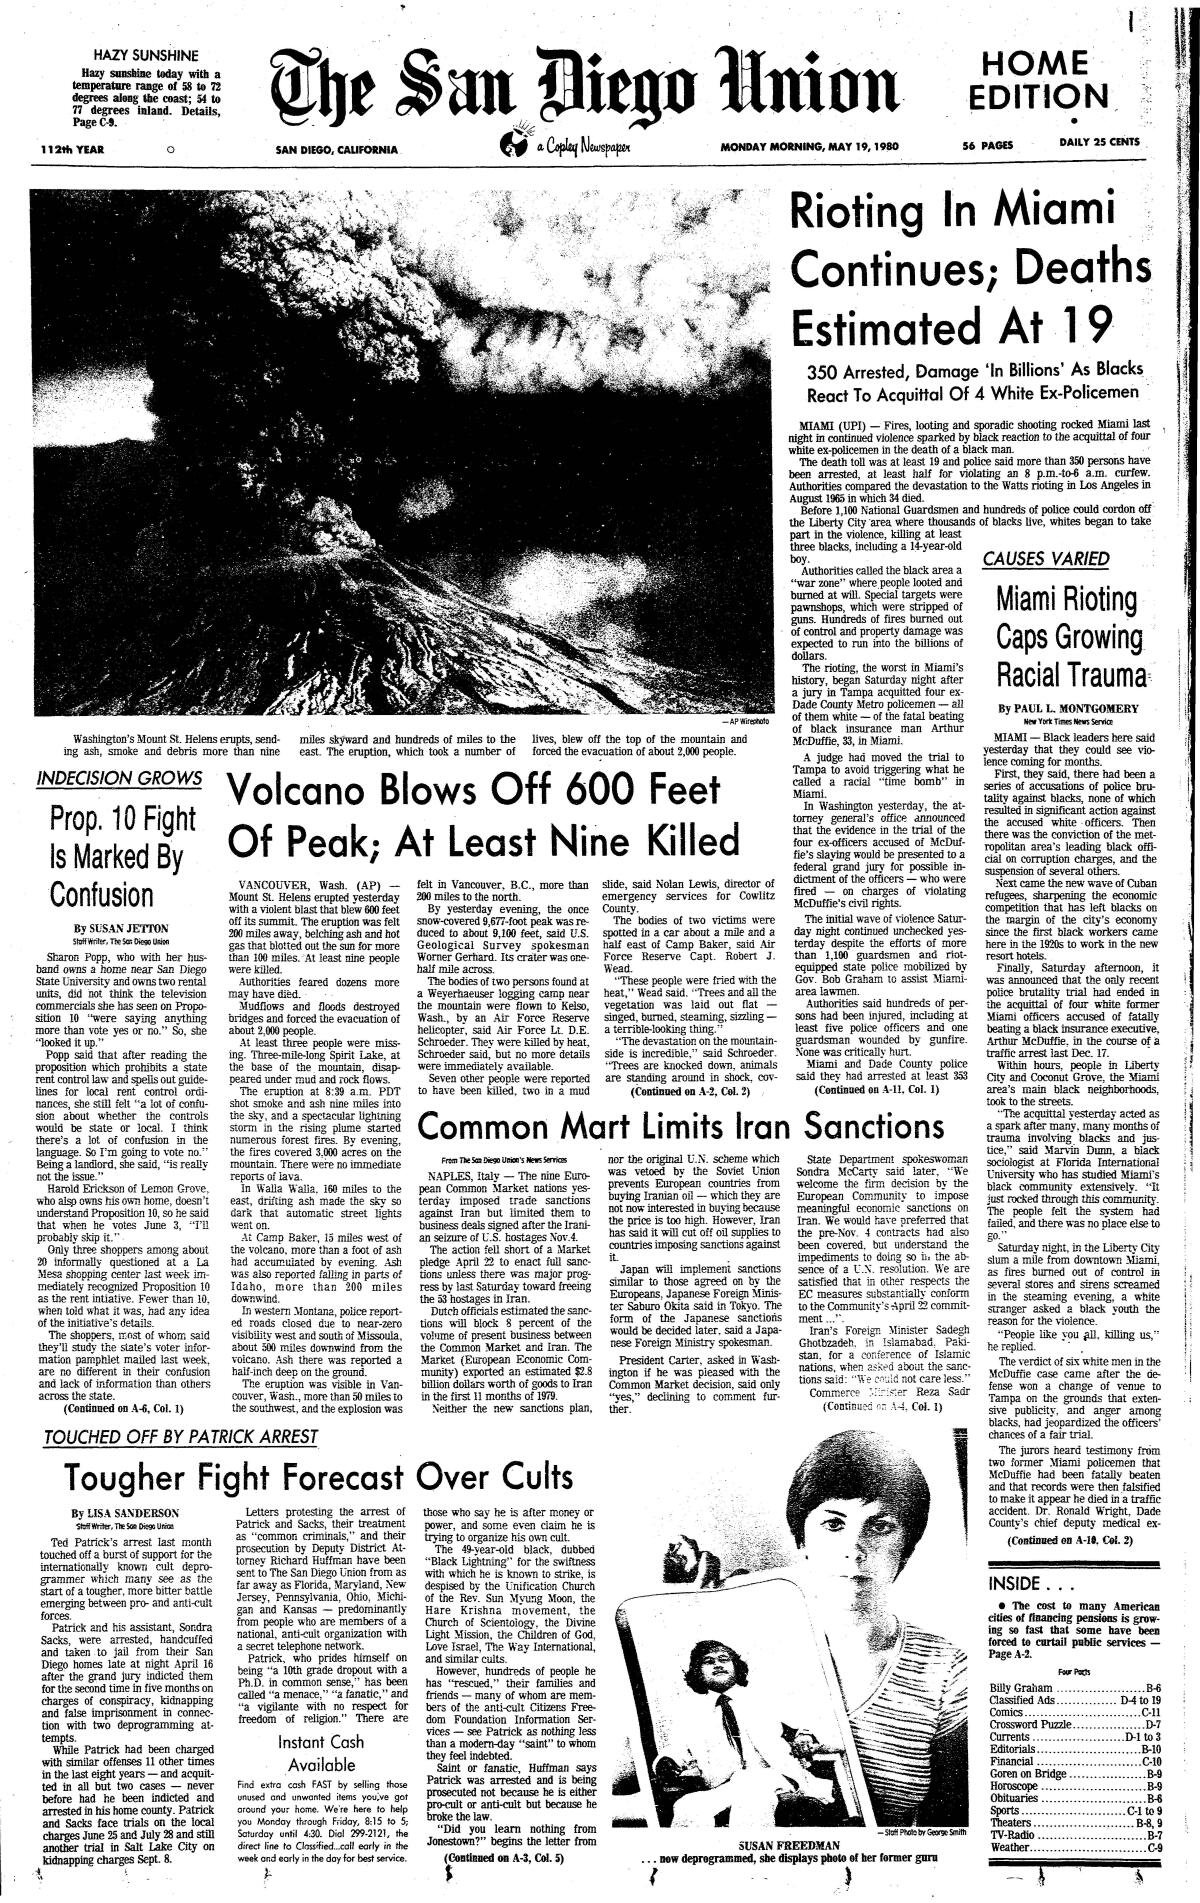 Front page of The San Diego Union May 19, 1980 with an aerial photo of the Mount St. Helen's volcano eruption.